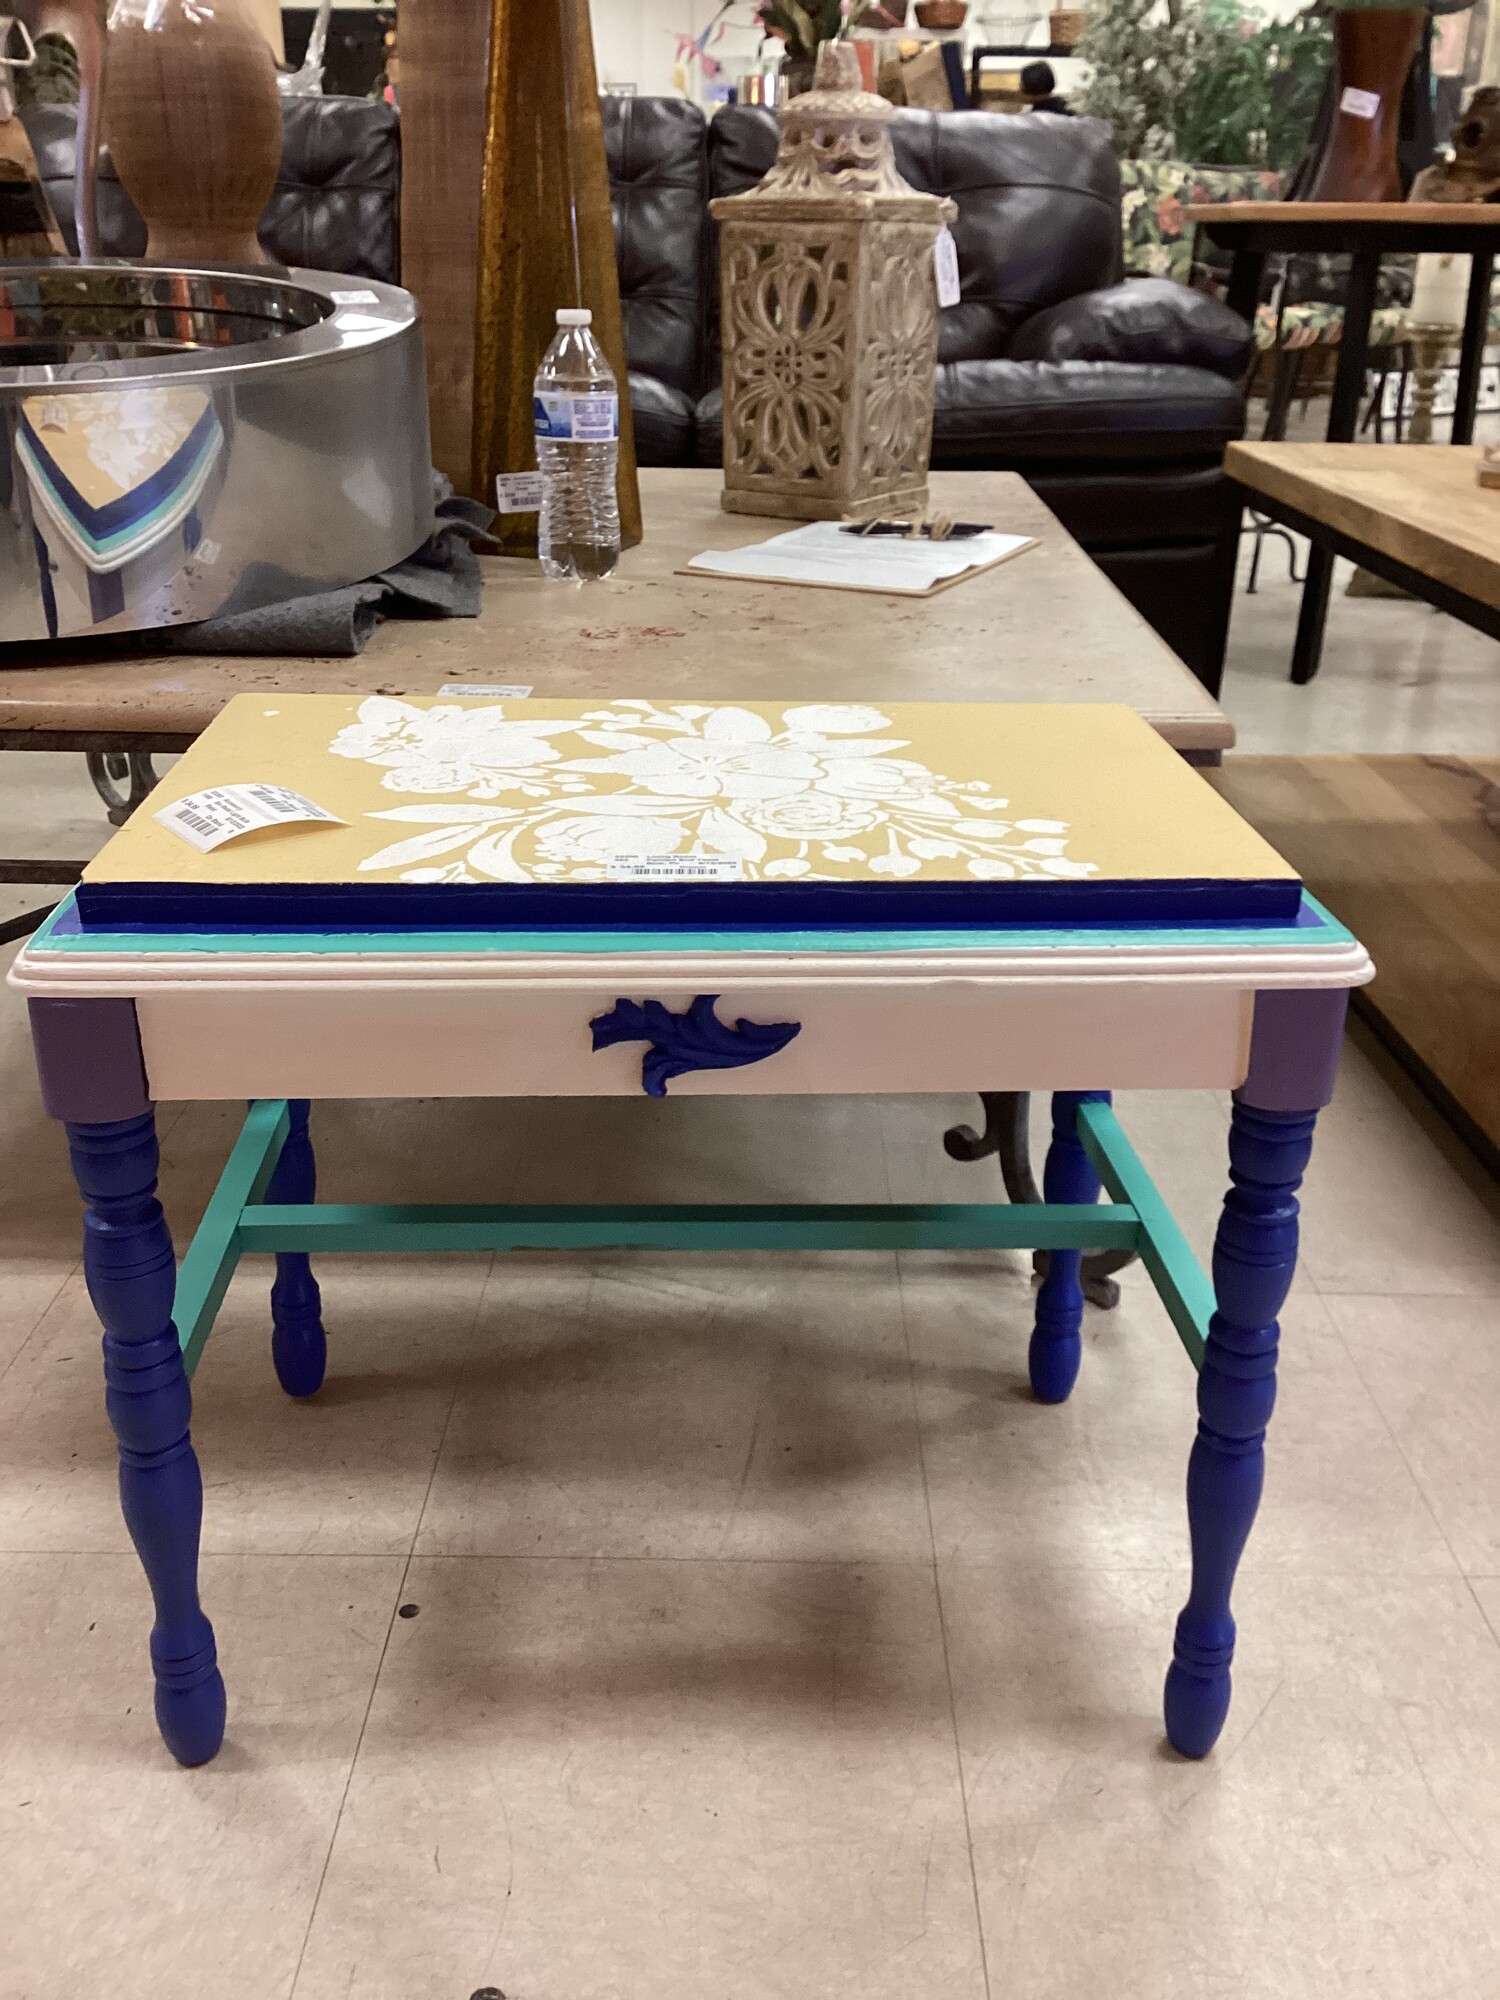 Painted End Table, Blue, Pu, Cream
22 In W x 14 In D x 18 In T